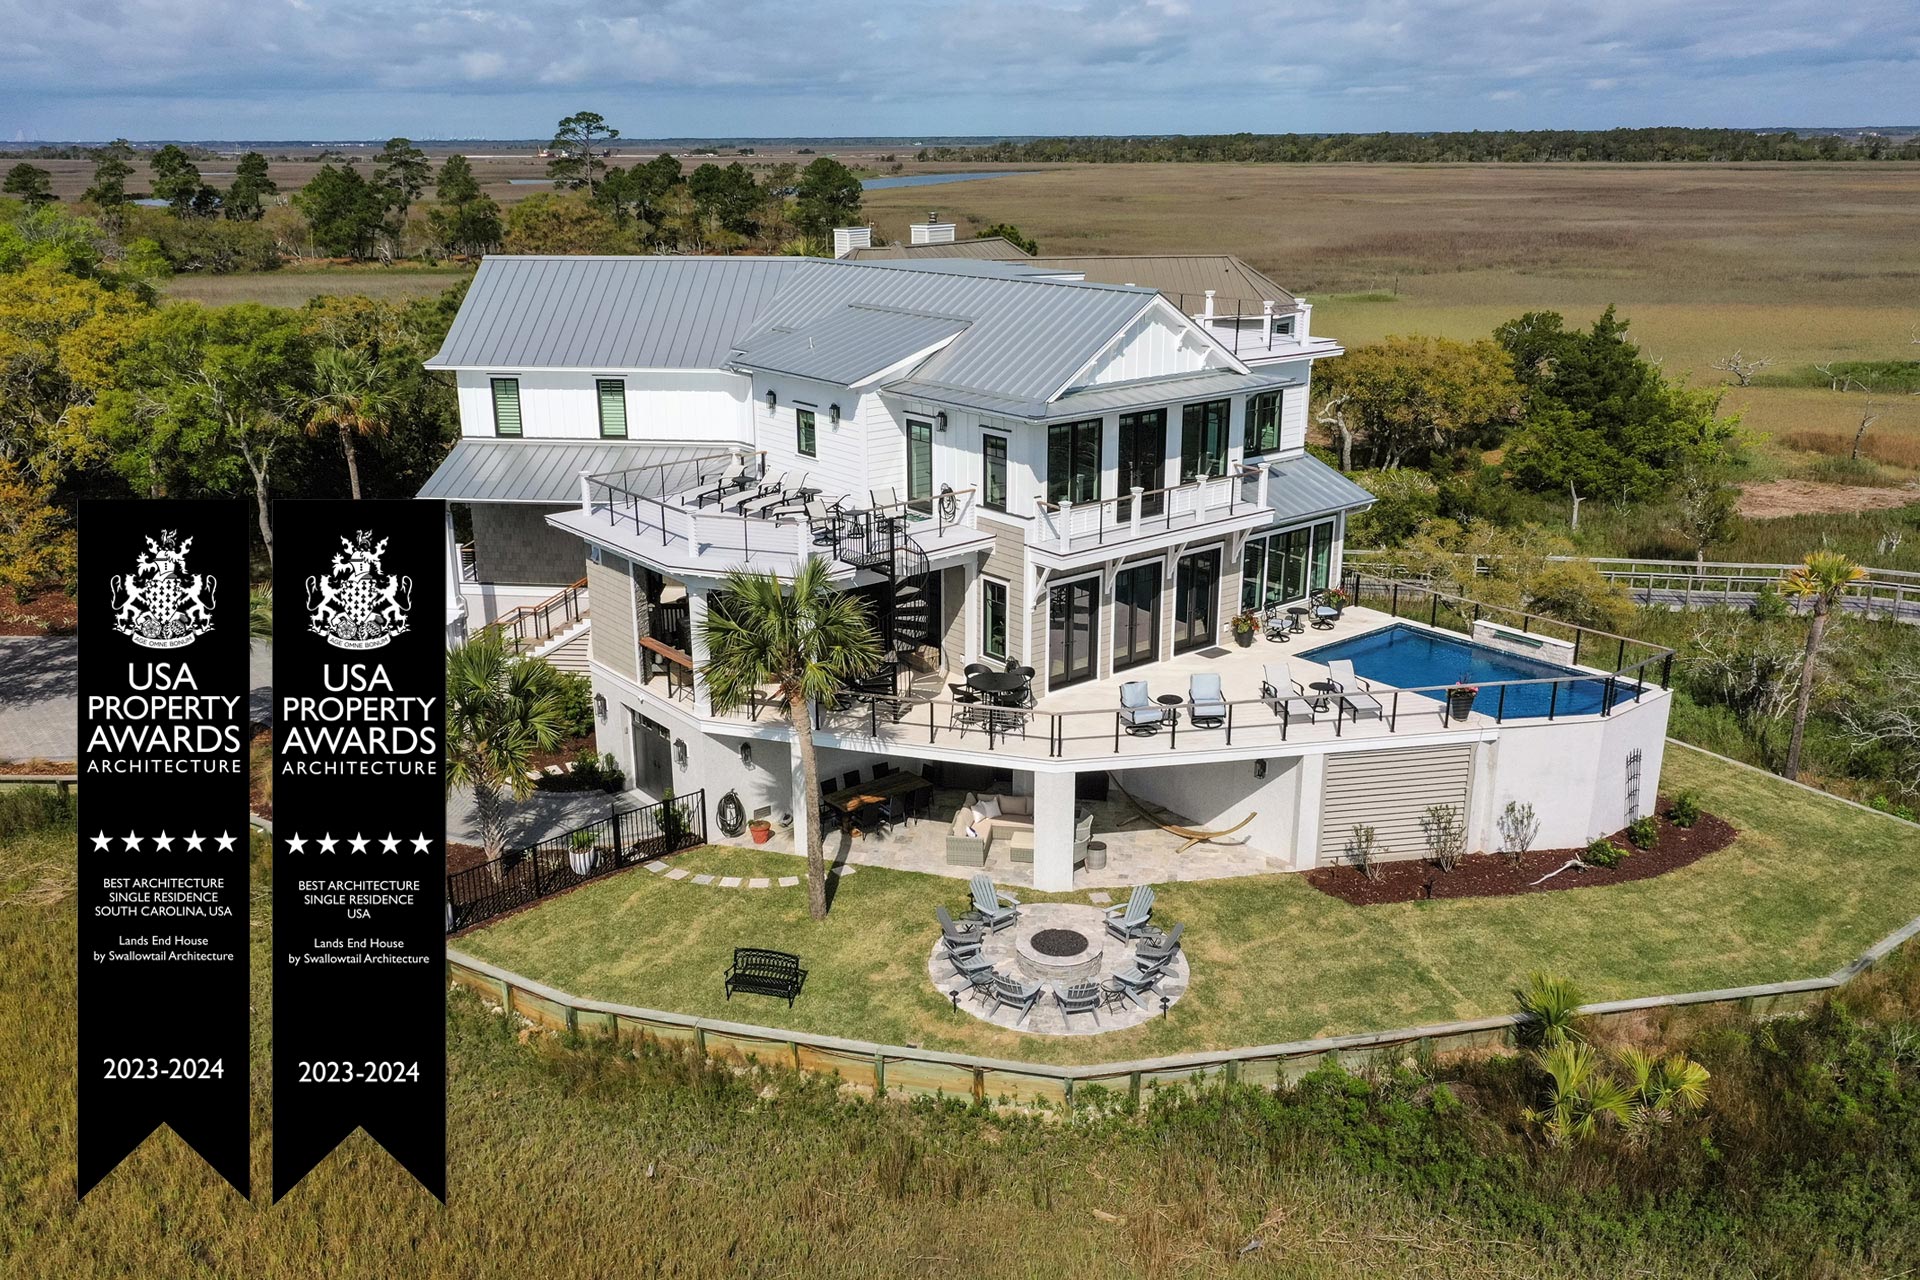 USA Property Awards for Best Architecture for Single Residence in the United States in South Carolina Awarded to Swallowtail Architecture